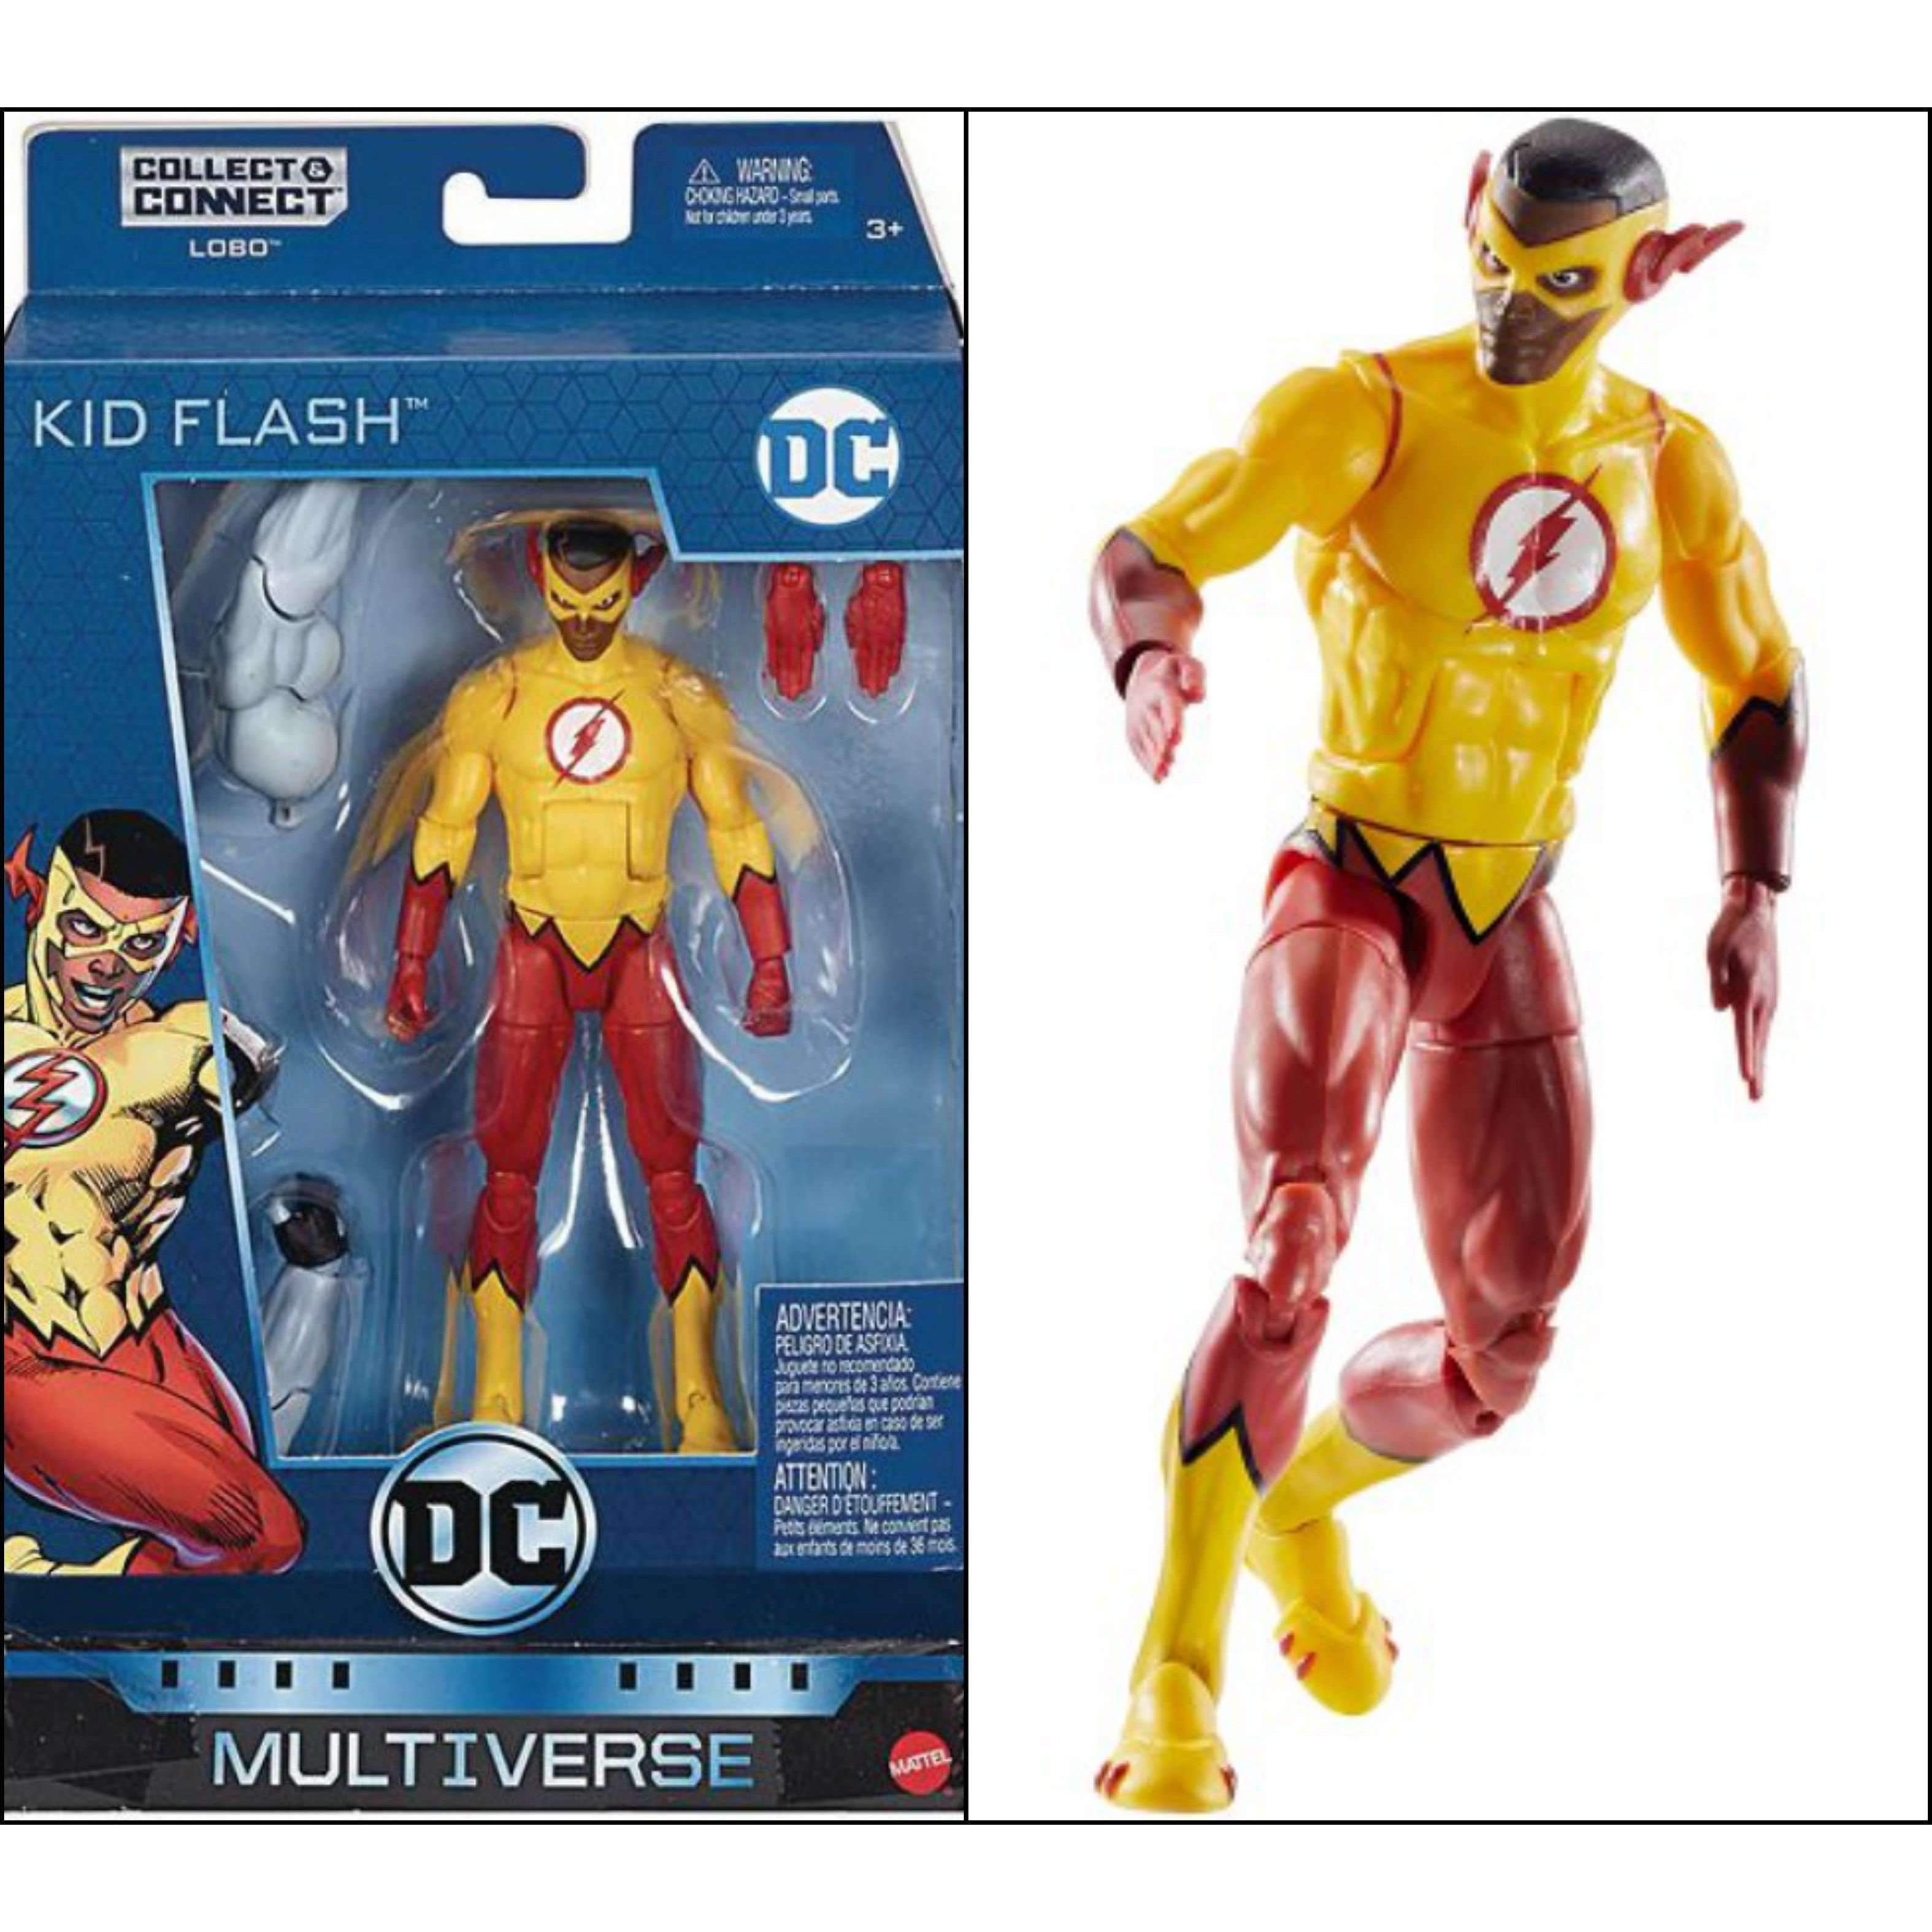 Image of DC Comics Multiverse Wave 10 (Collect & Connect Lobo) - Kid Flash - BACKORDERED APRIL 2019